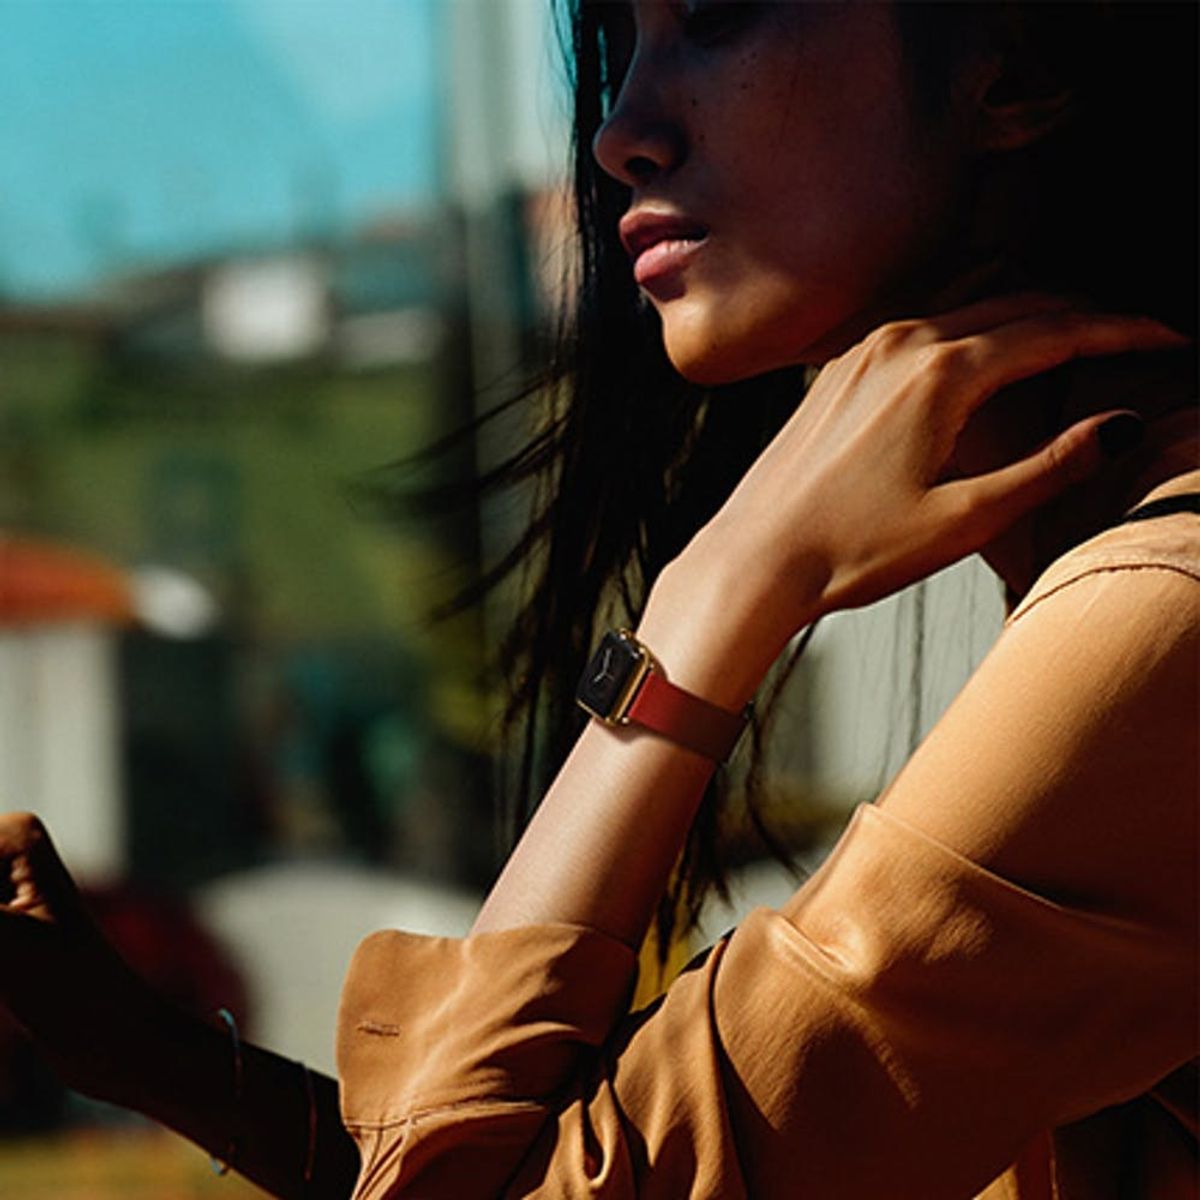 How to Make Your Smartwatch Track Your Blood Sugar